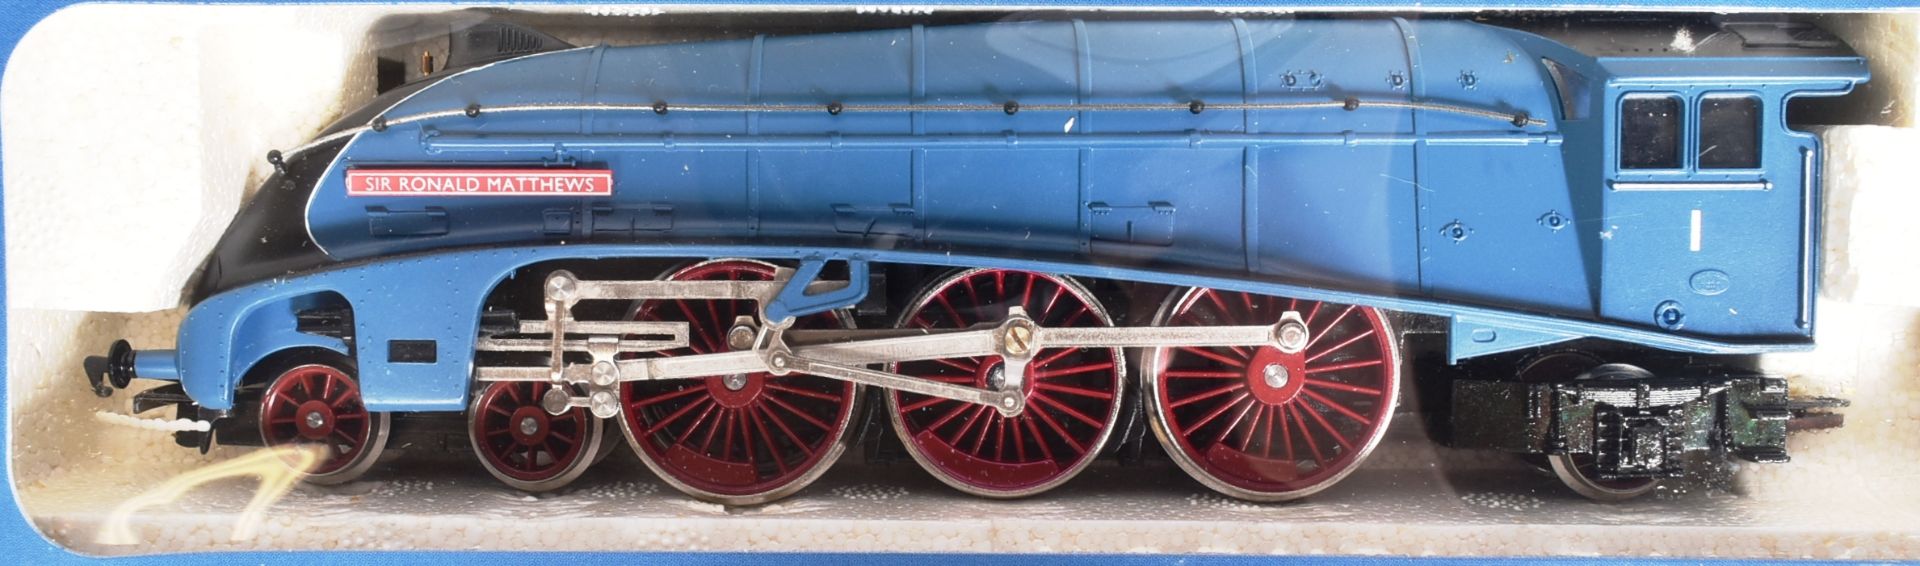 MODEL RAILWAY - HORNBY ROYAL DOULTON COLLECTION - Image 4 of 5